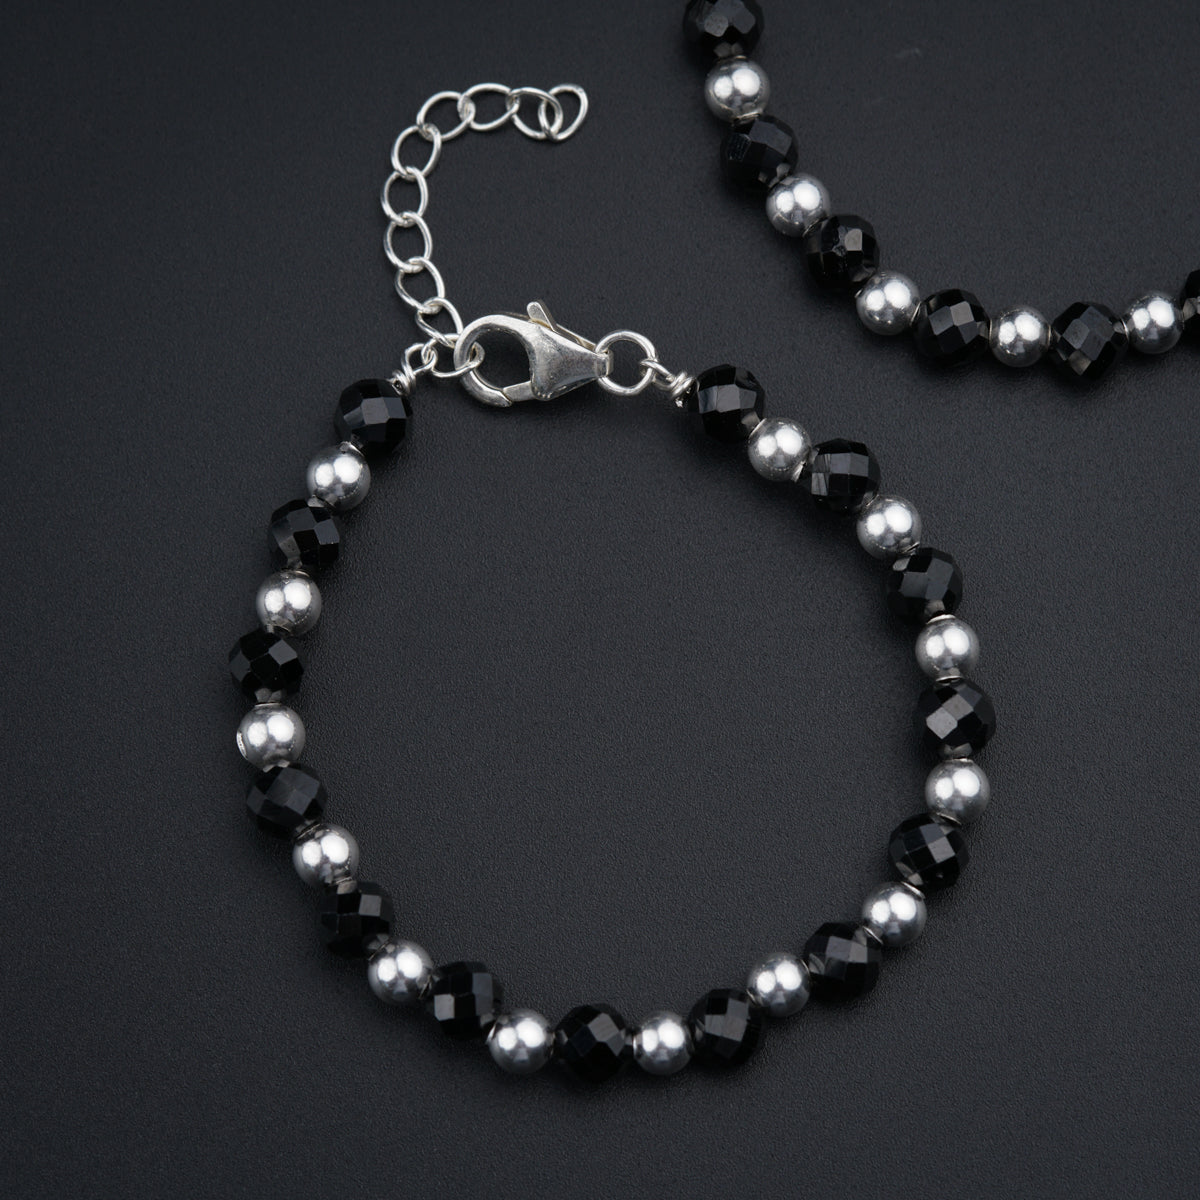 a black and silver beaded bracelet on a black surface